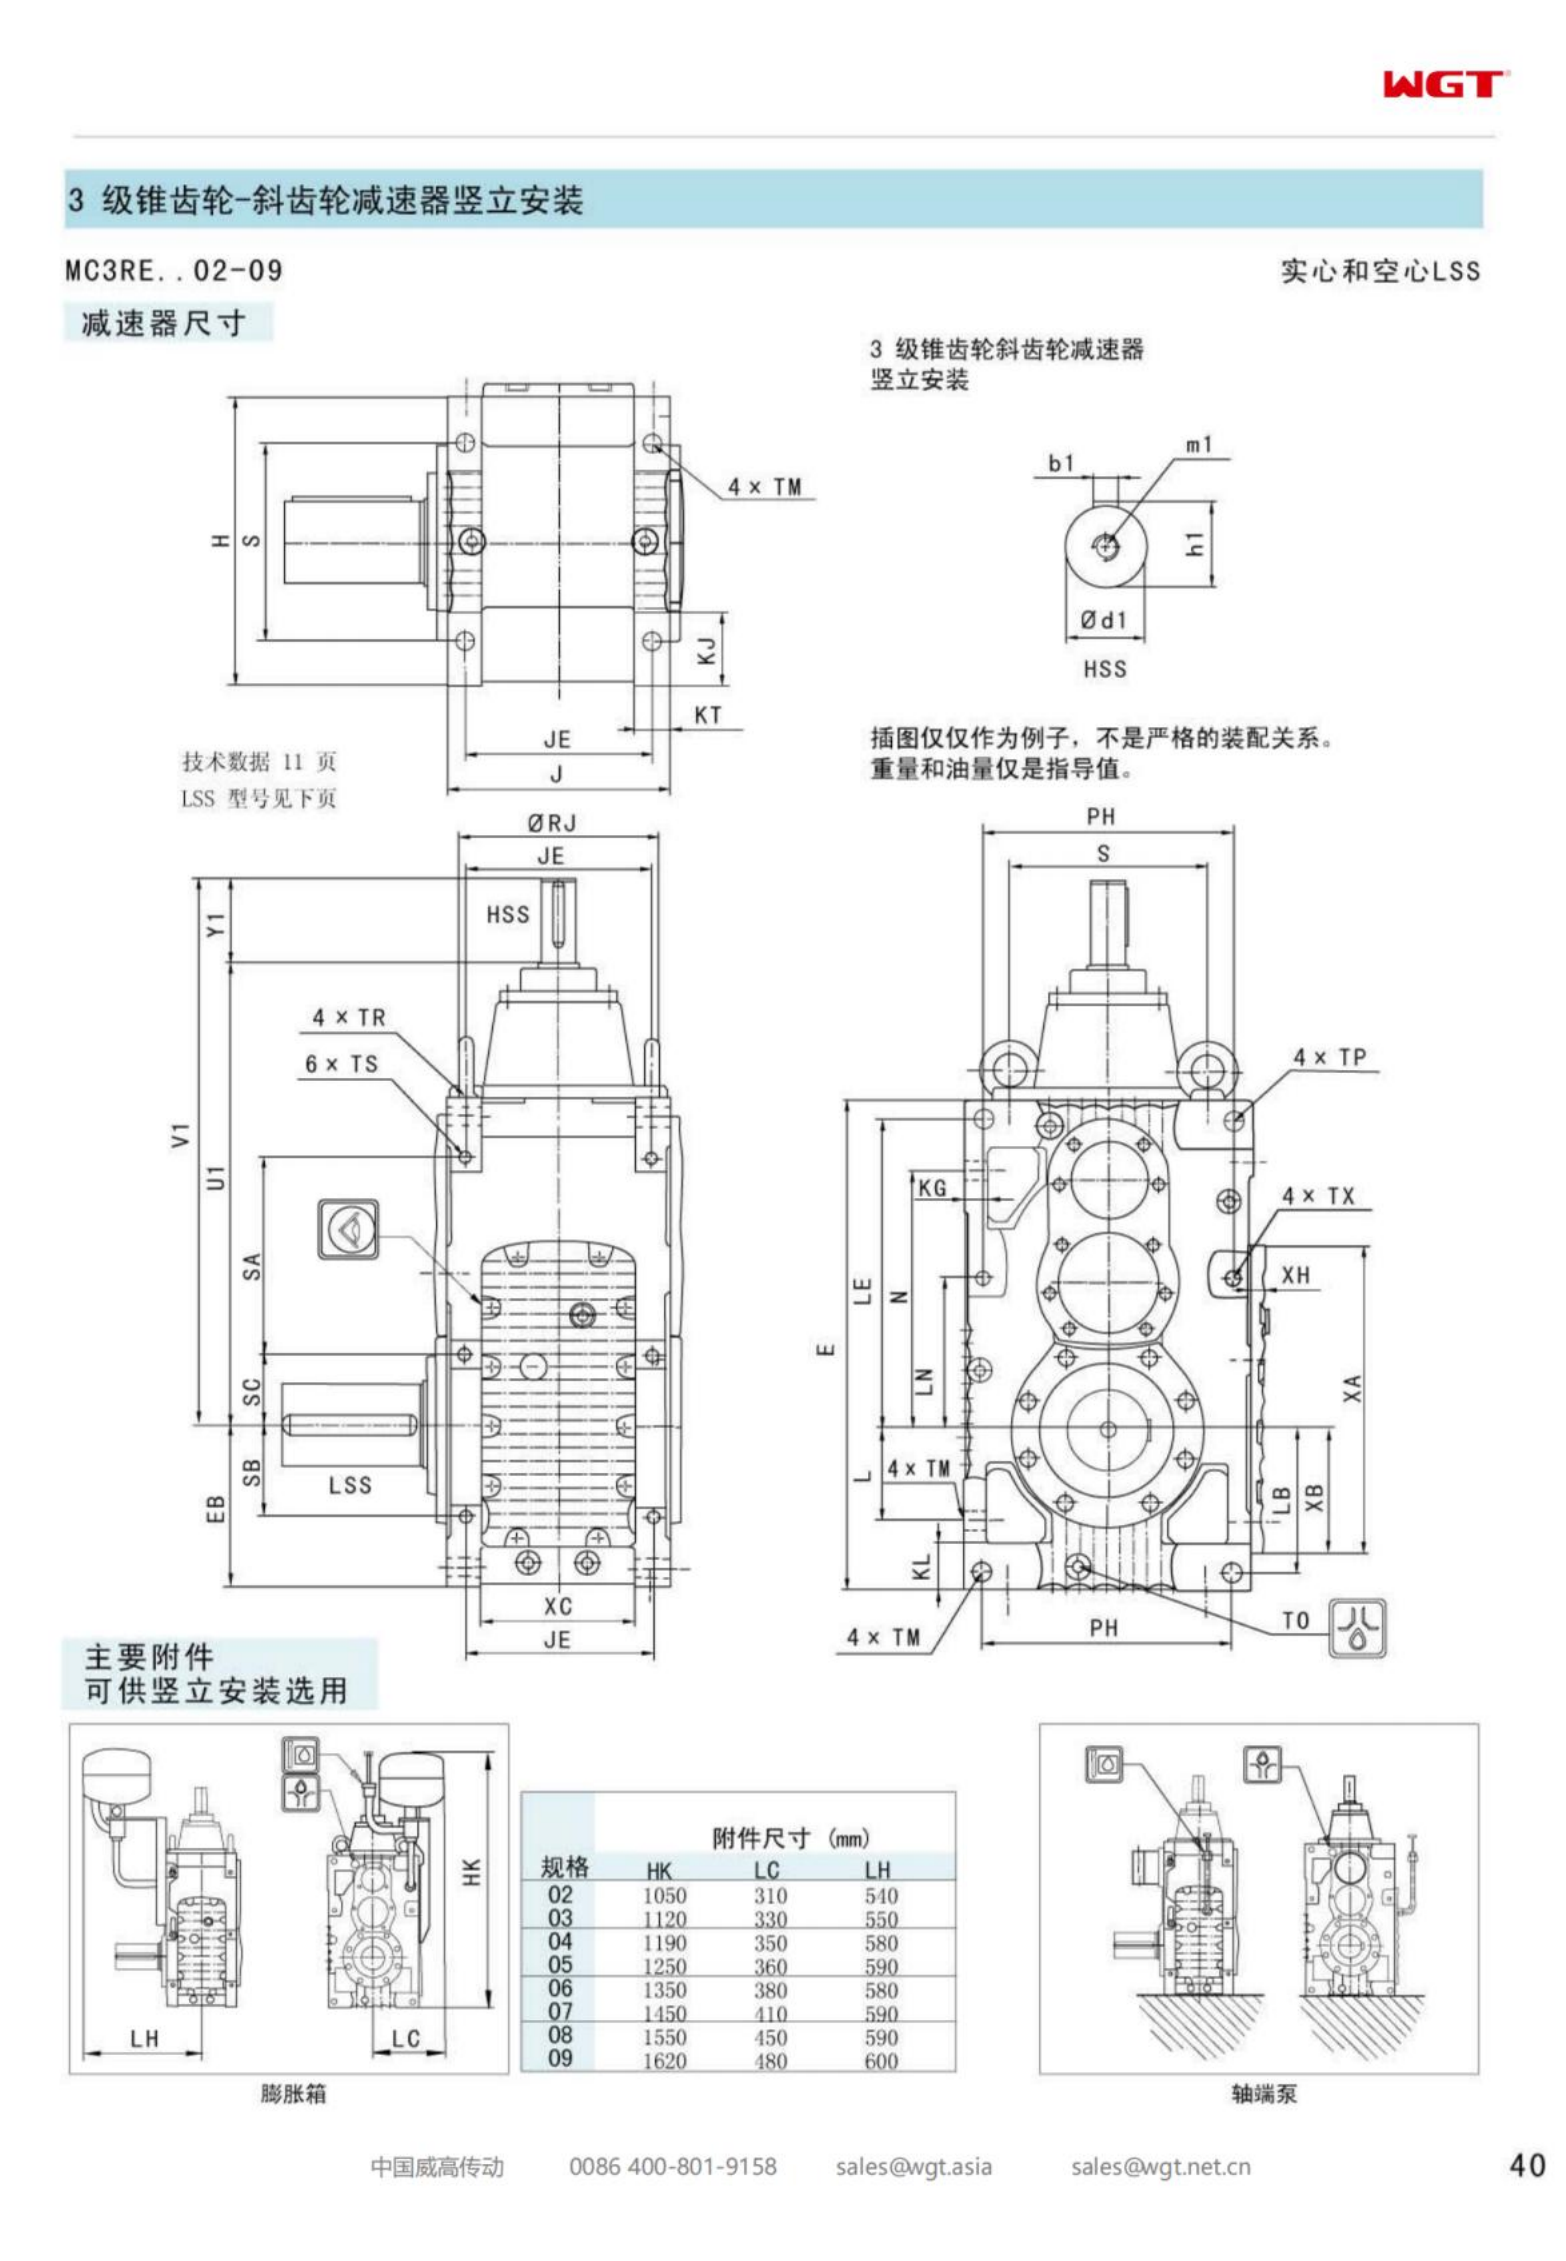 MC3RESF02 replaces _SEW_MC_Series gearbox (patent)